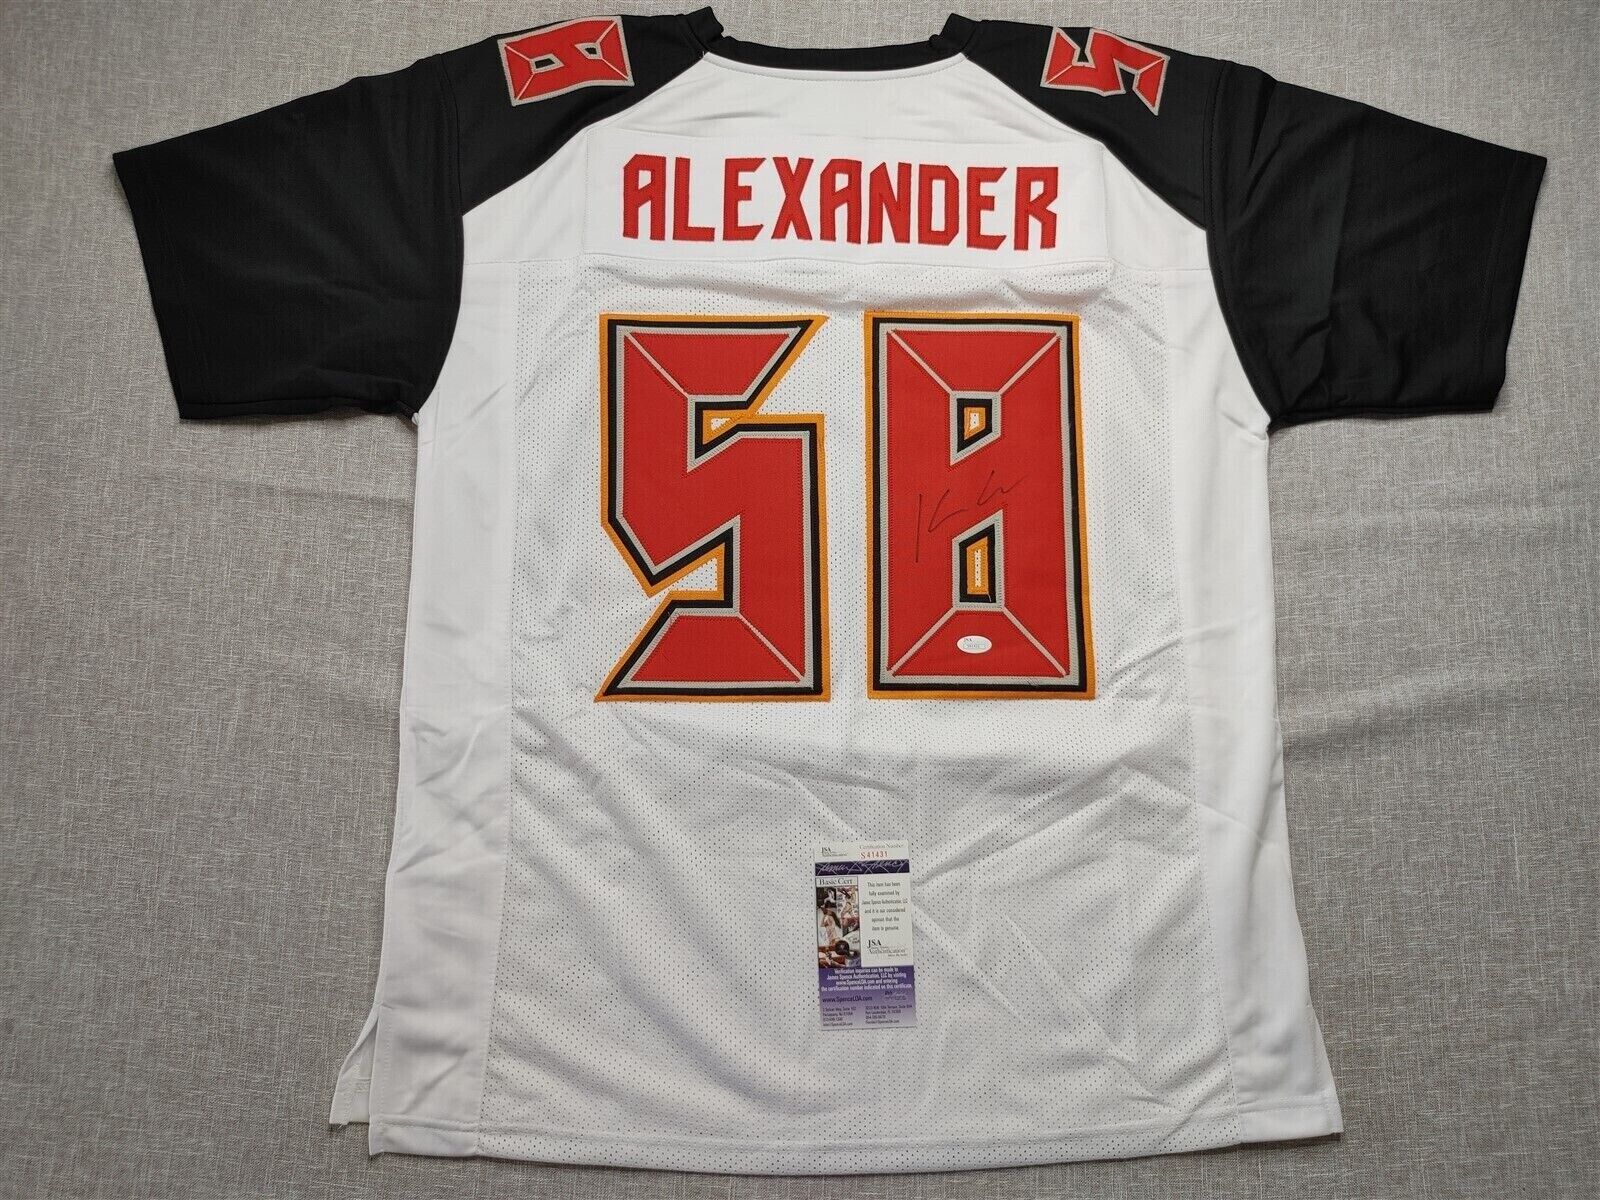 How To Clean A White Jersey KWON ALEXANDER SIGNED AUTO TAMPA BAY BUCS WHITE JERSEY JSA BUCCANEERS  AUTOGRAPH | eBay